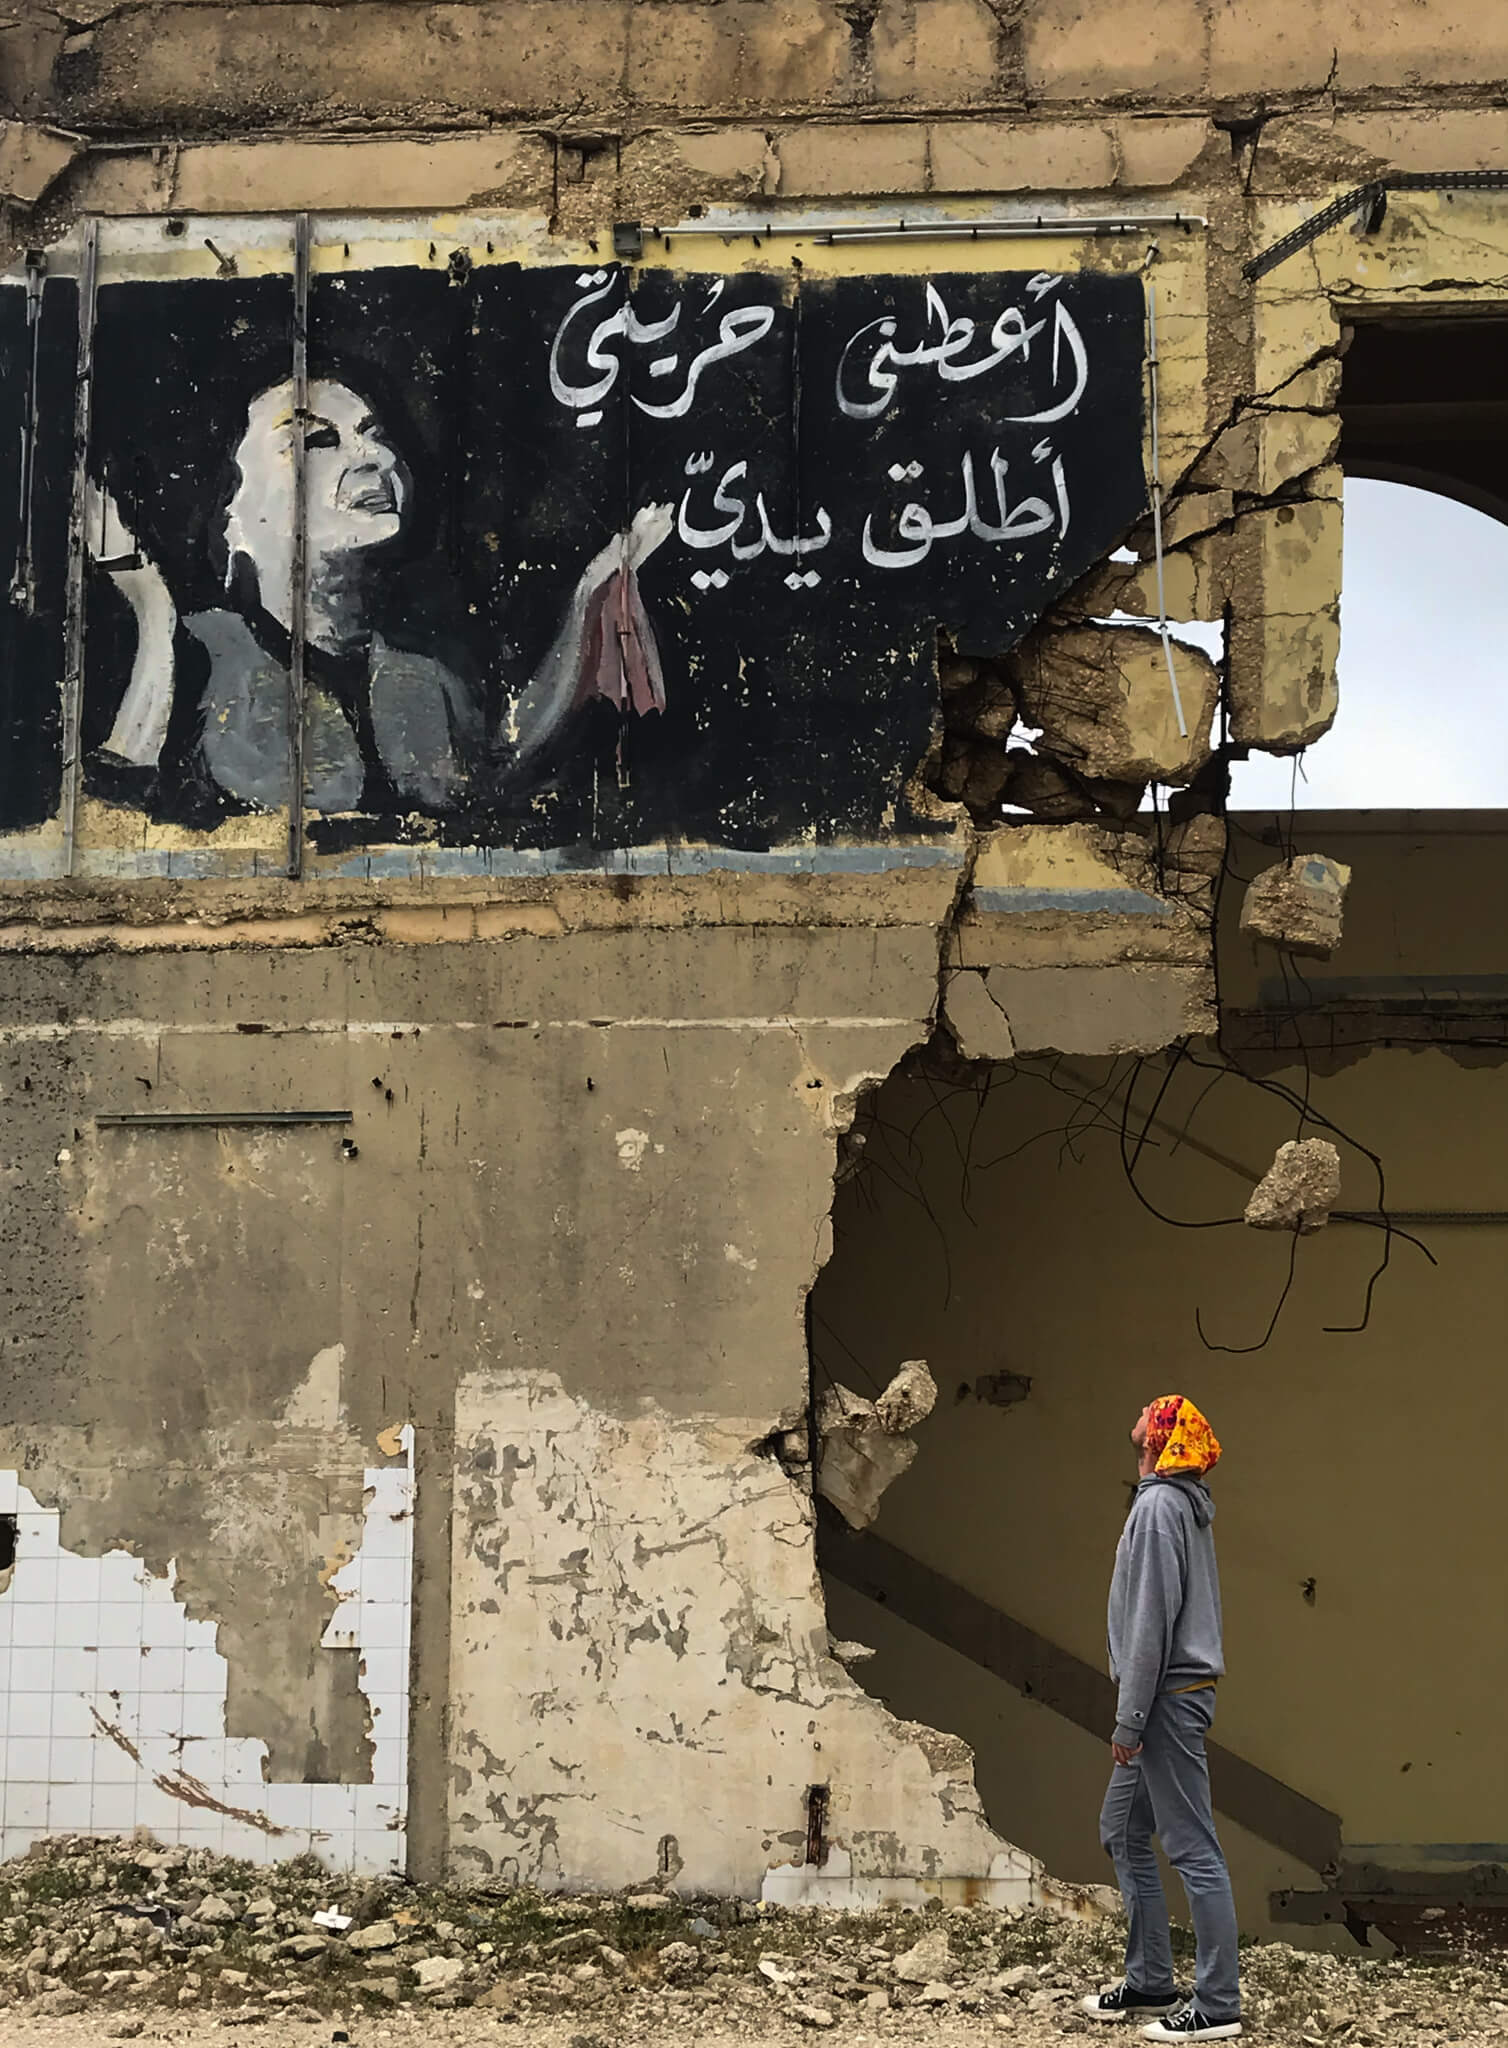 An badly-damaged building with graffiti of a famous Egyptian singer with her Lyrics written in Arabic.  